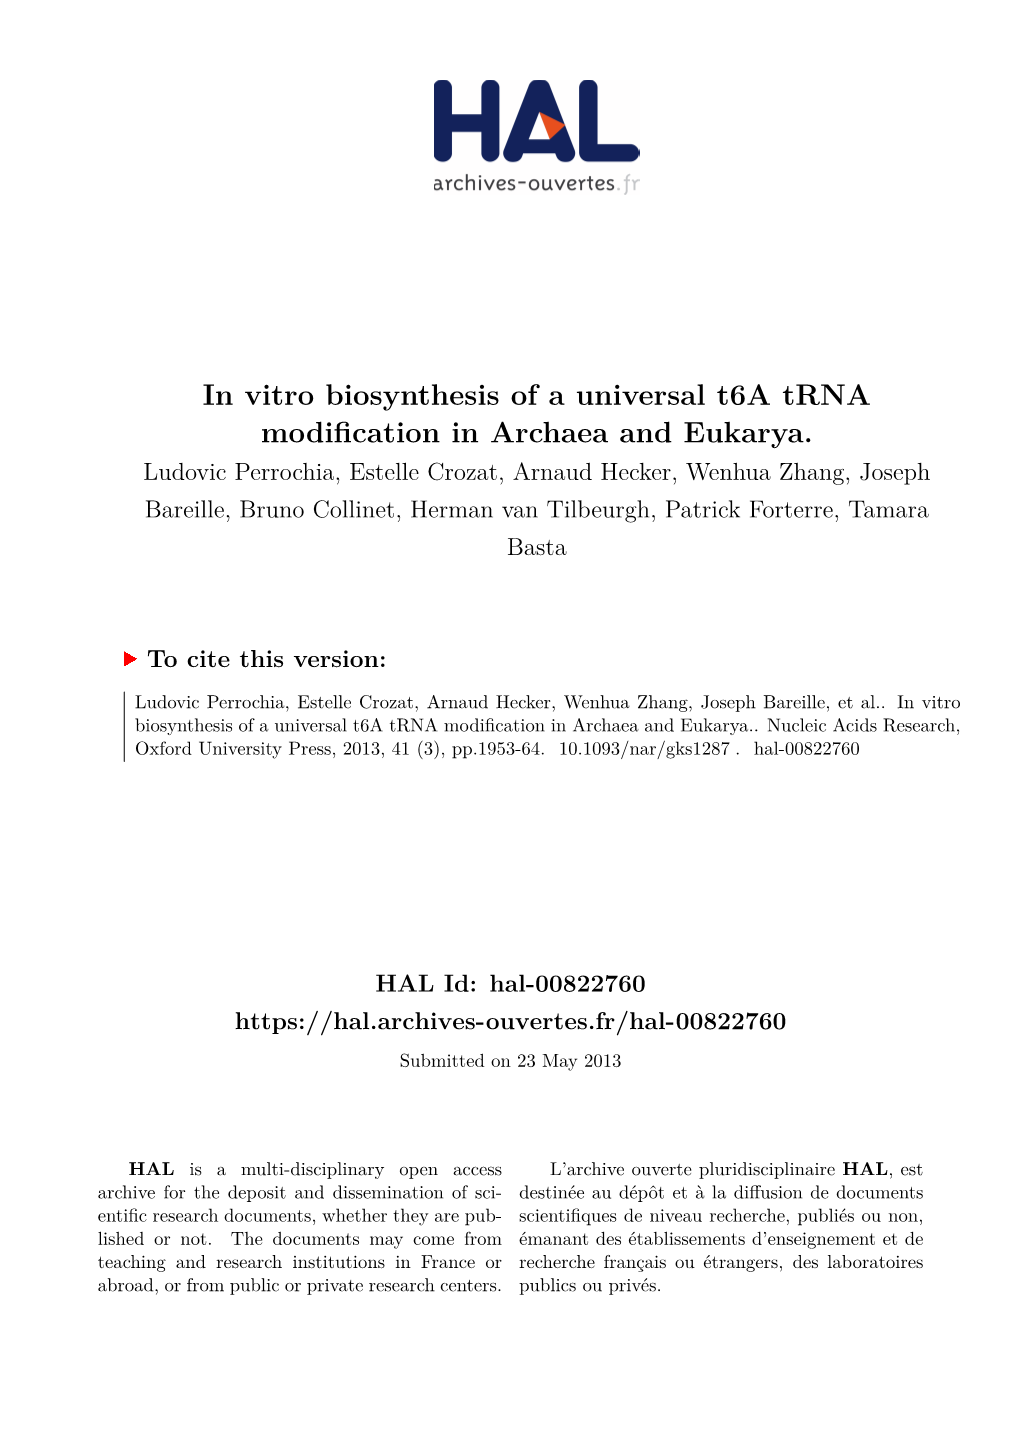 In Vitro Biosynthesis of a Universal T6a Trna Modification in Archaea and Eukarya